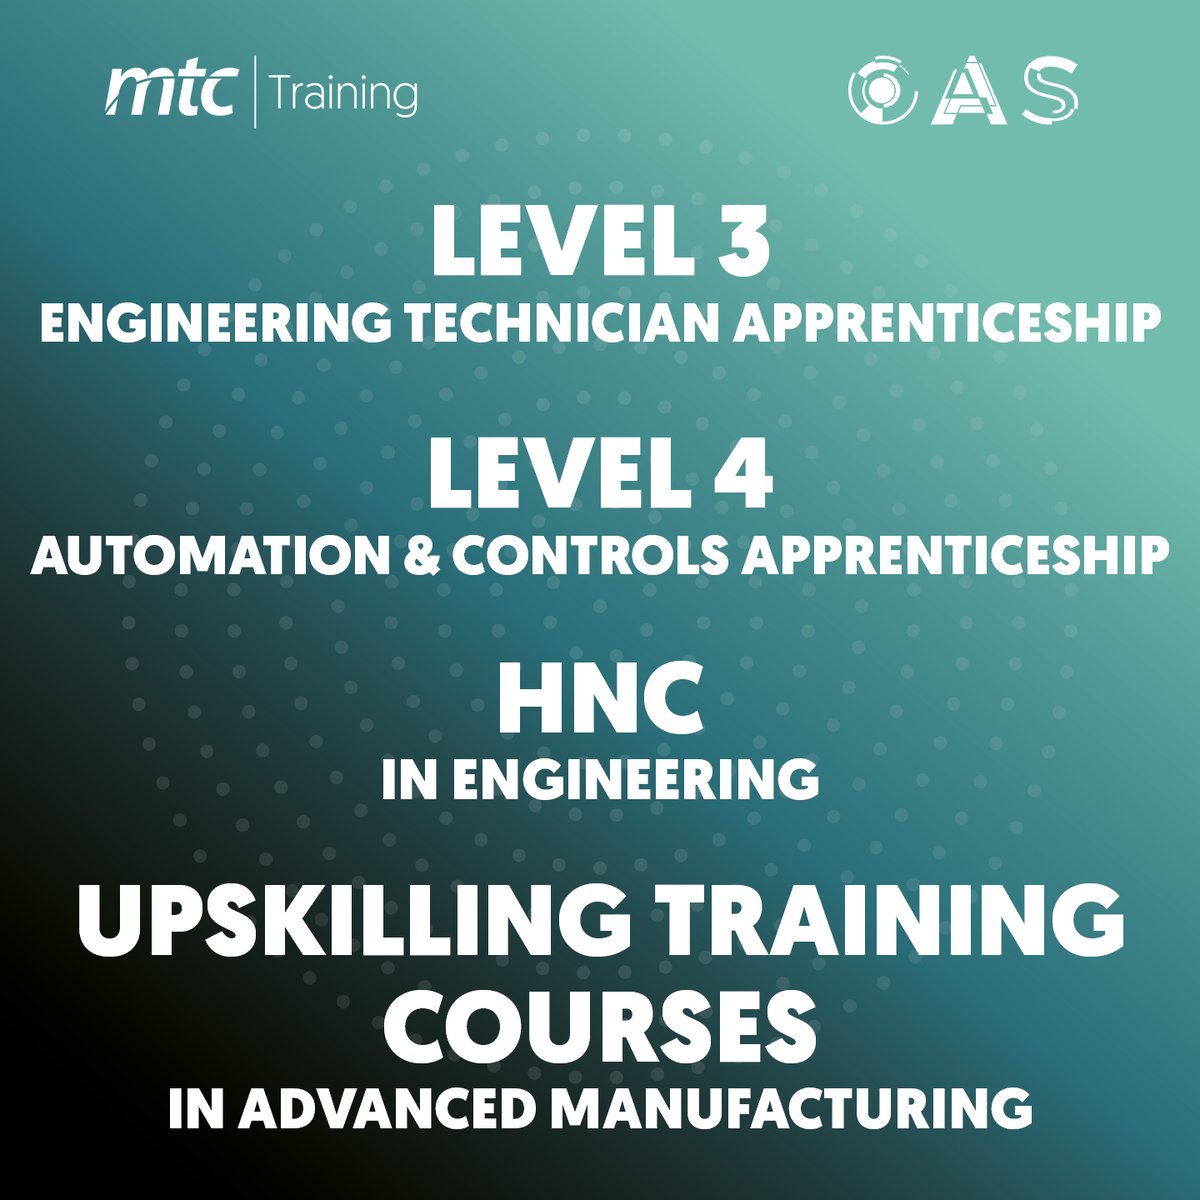 Did you know MTC Training provides advanced #engineering #apprenticeships and upskilling #training courses at @OAS_UKAEA? Located at Culham Science Centre, OAS helps learners develop the skills needed for delivering the technologies of the future in the #manufacturing sector